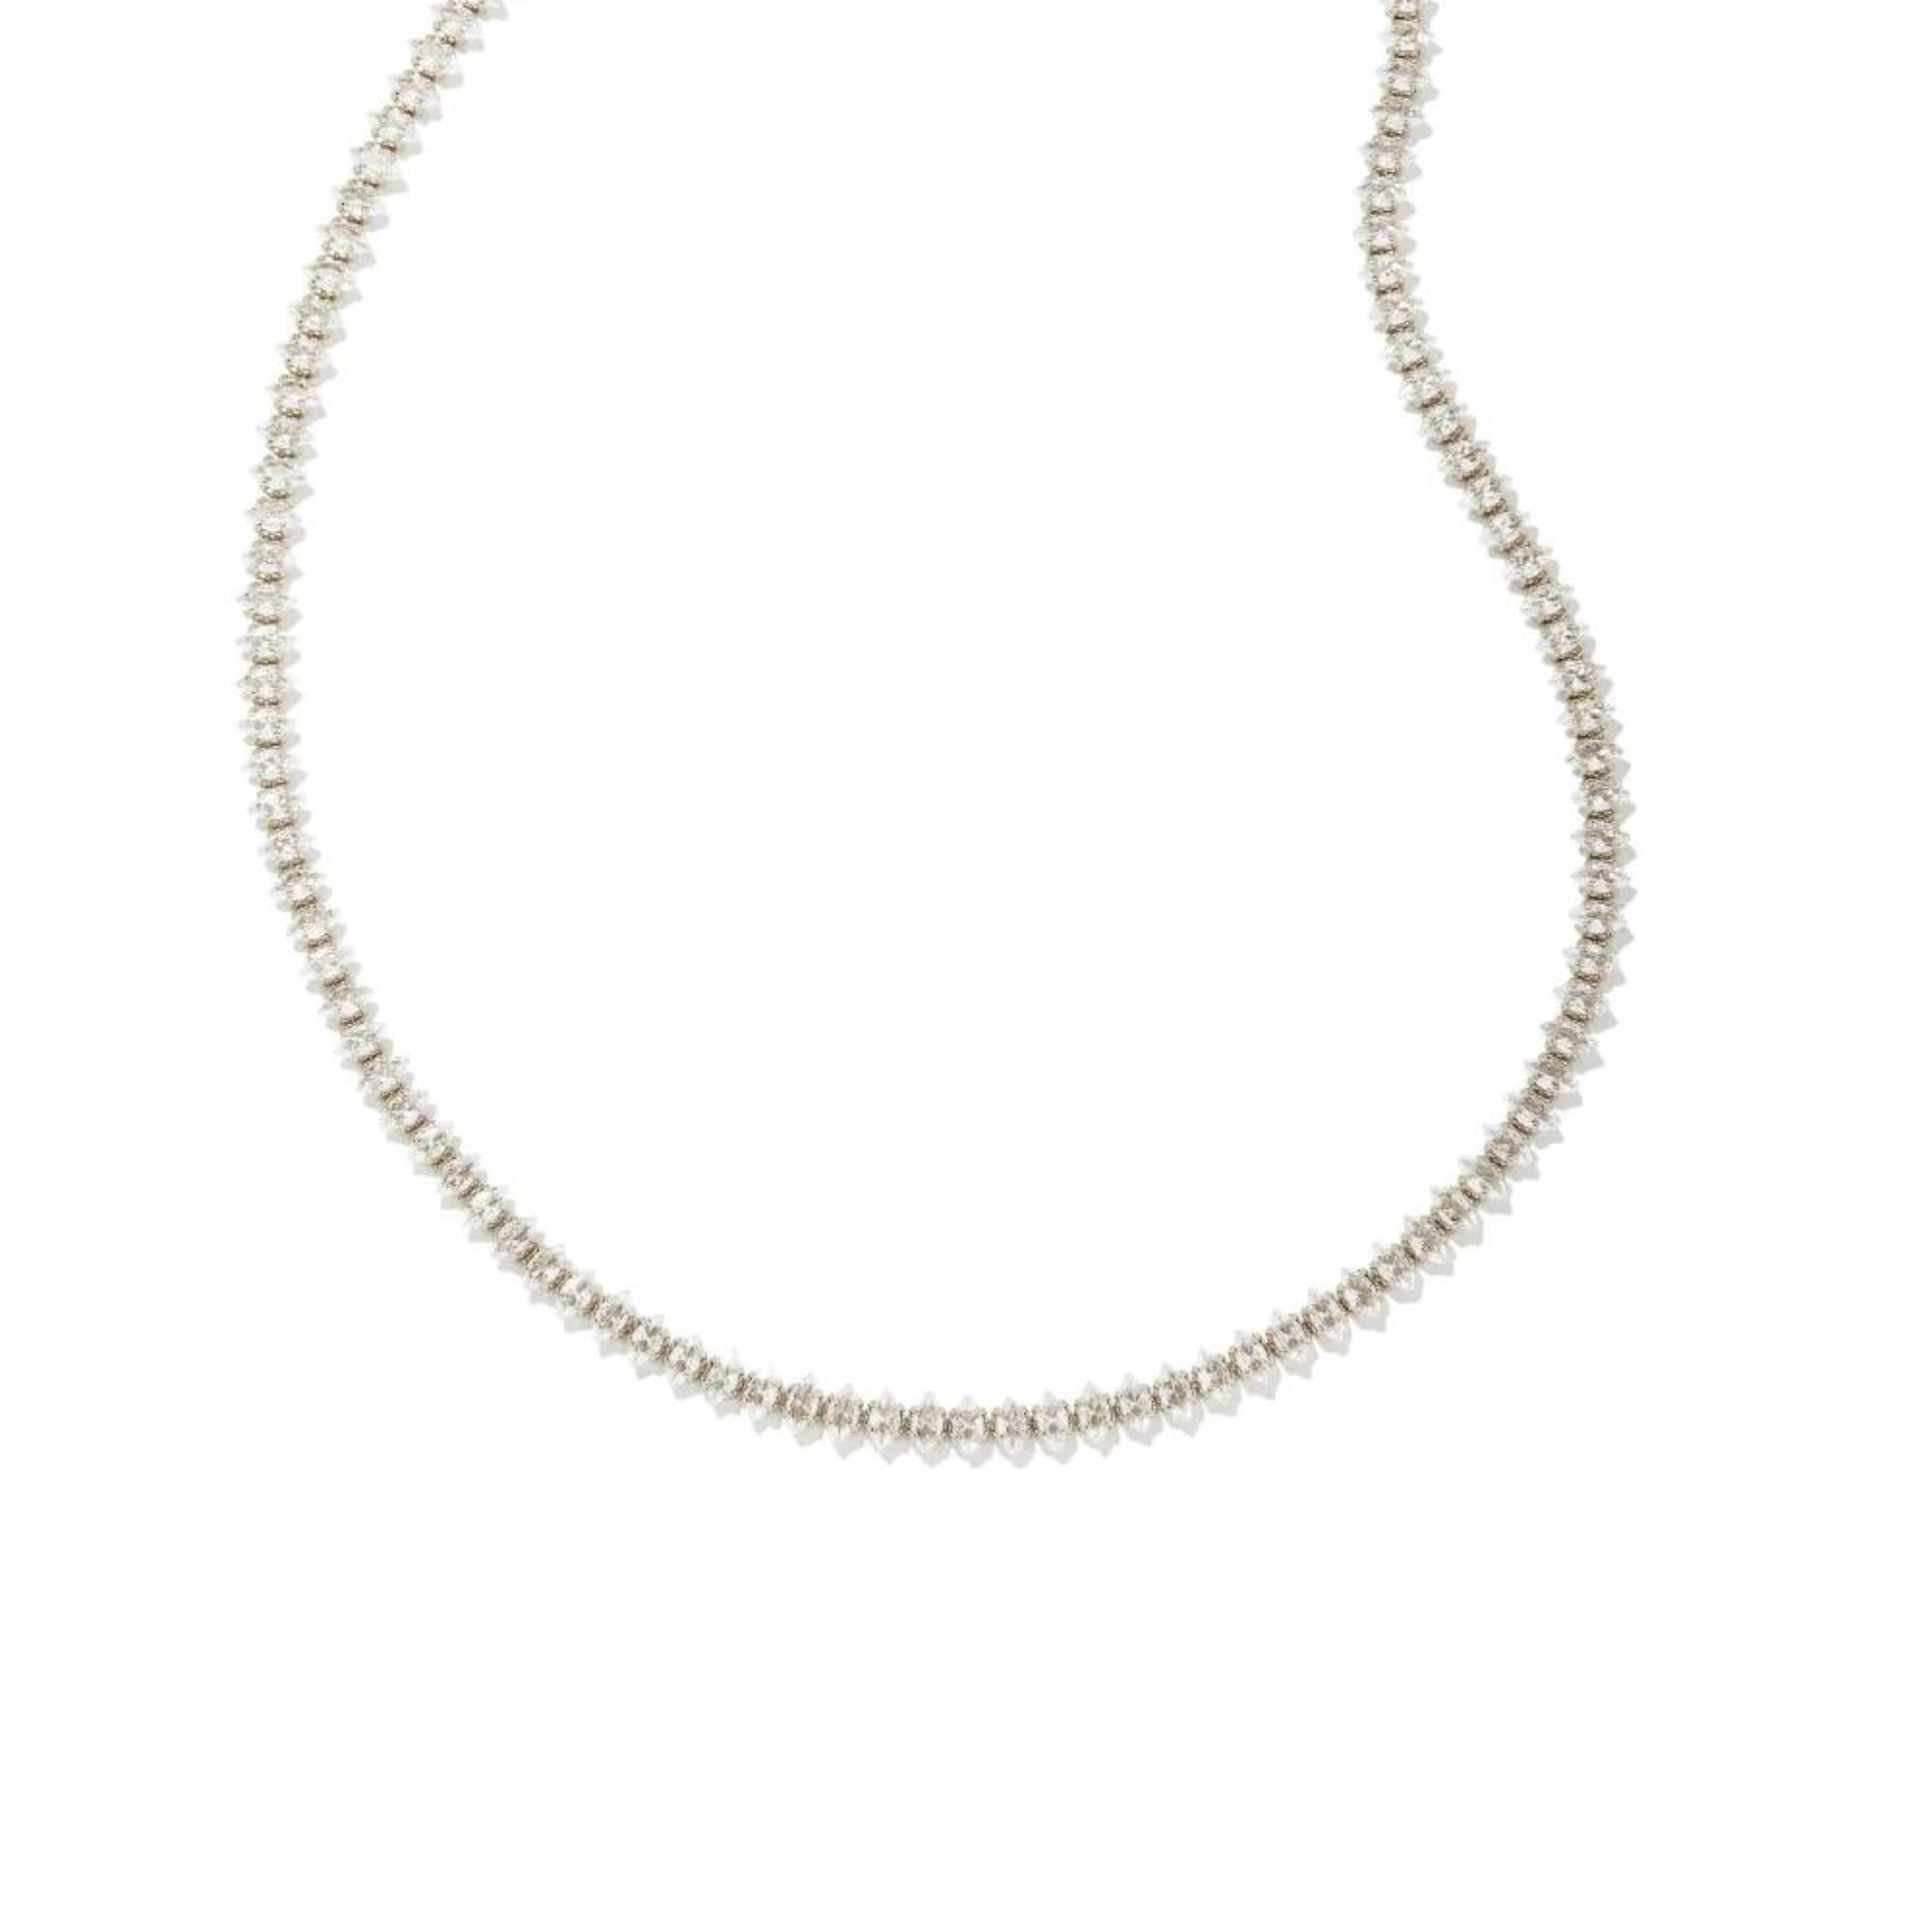 Pictured is a clear crystal tennis necklace in silver on a white background.